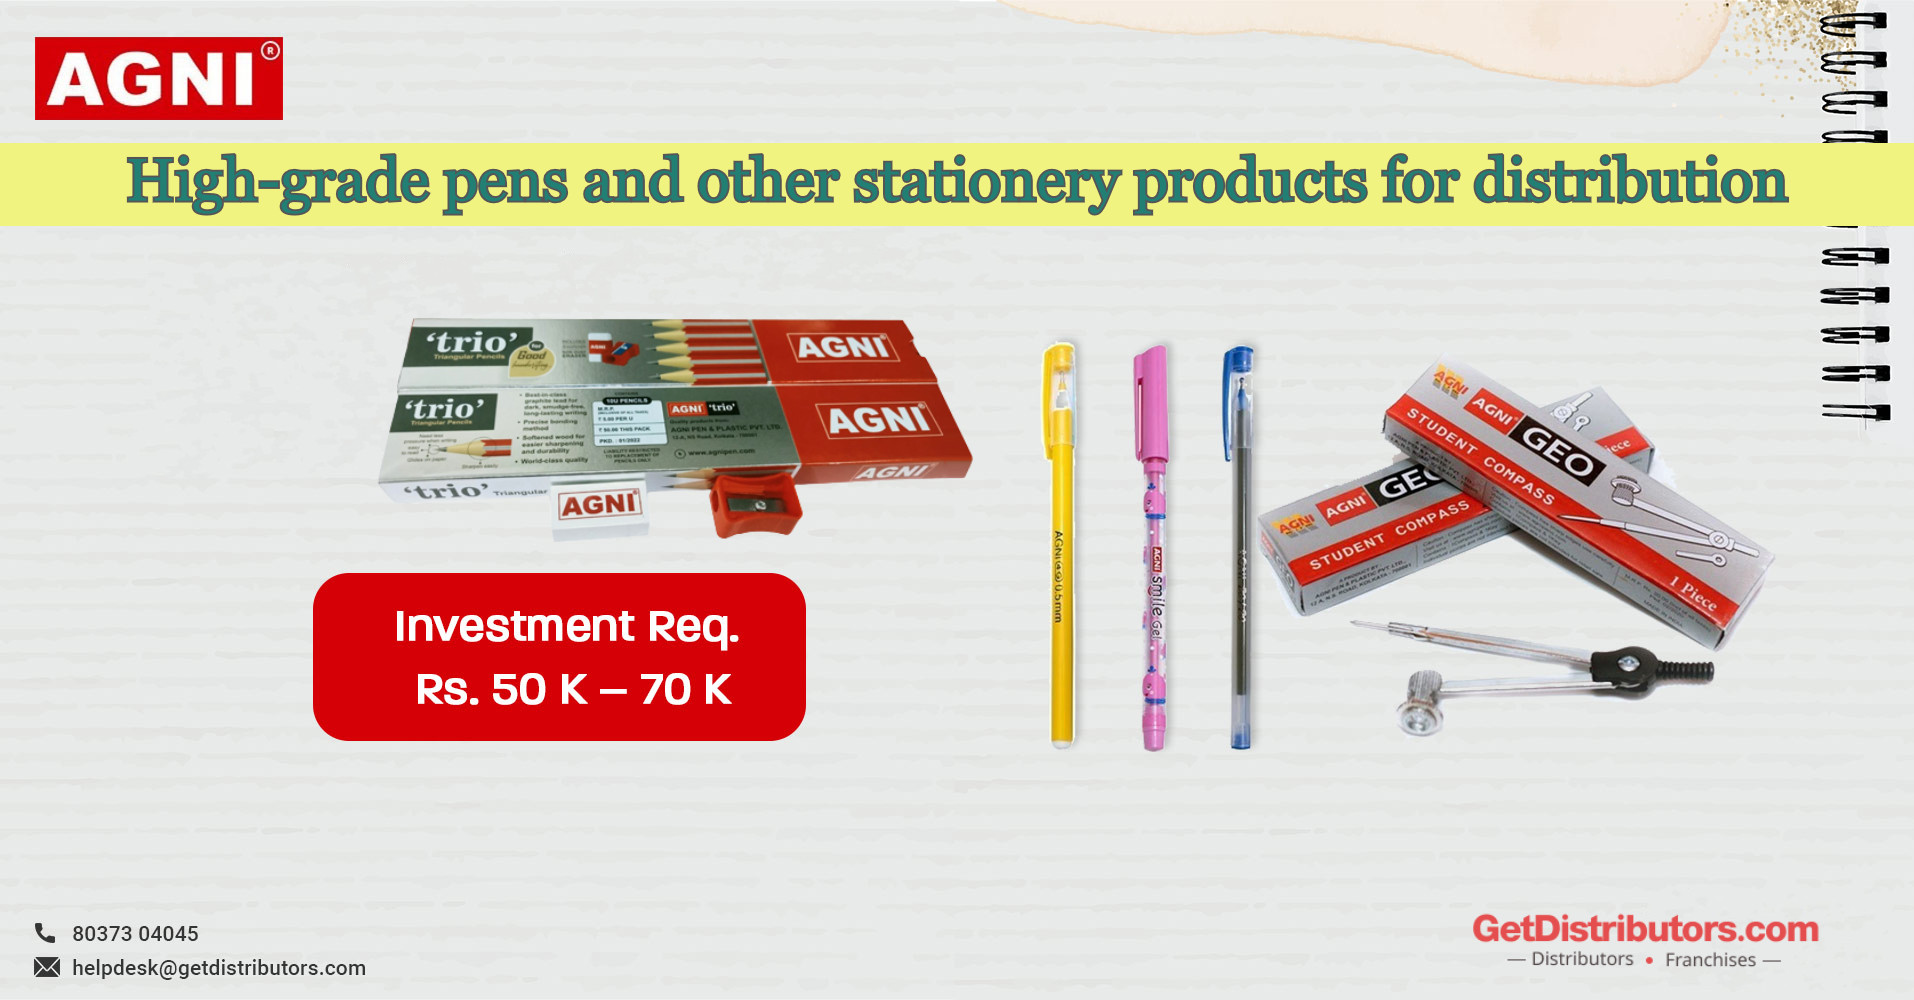 High-grade pens and other stationery products for distribution